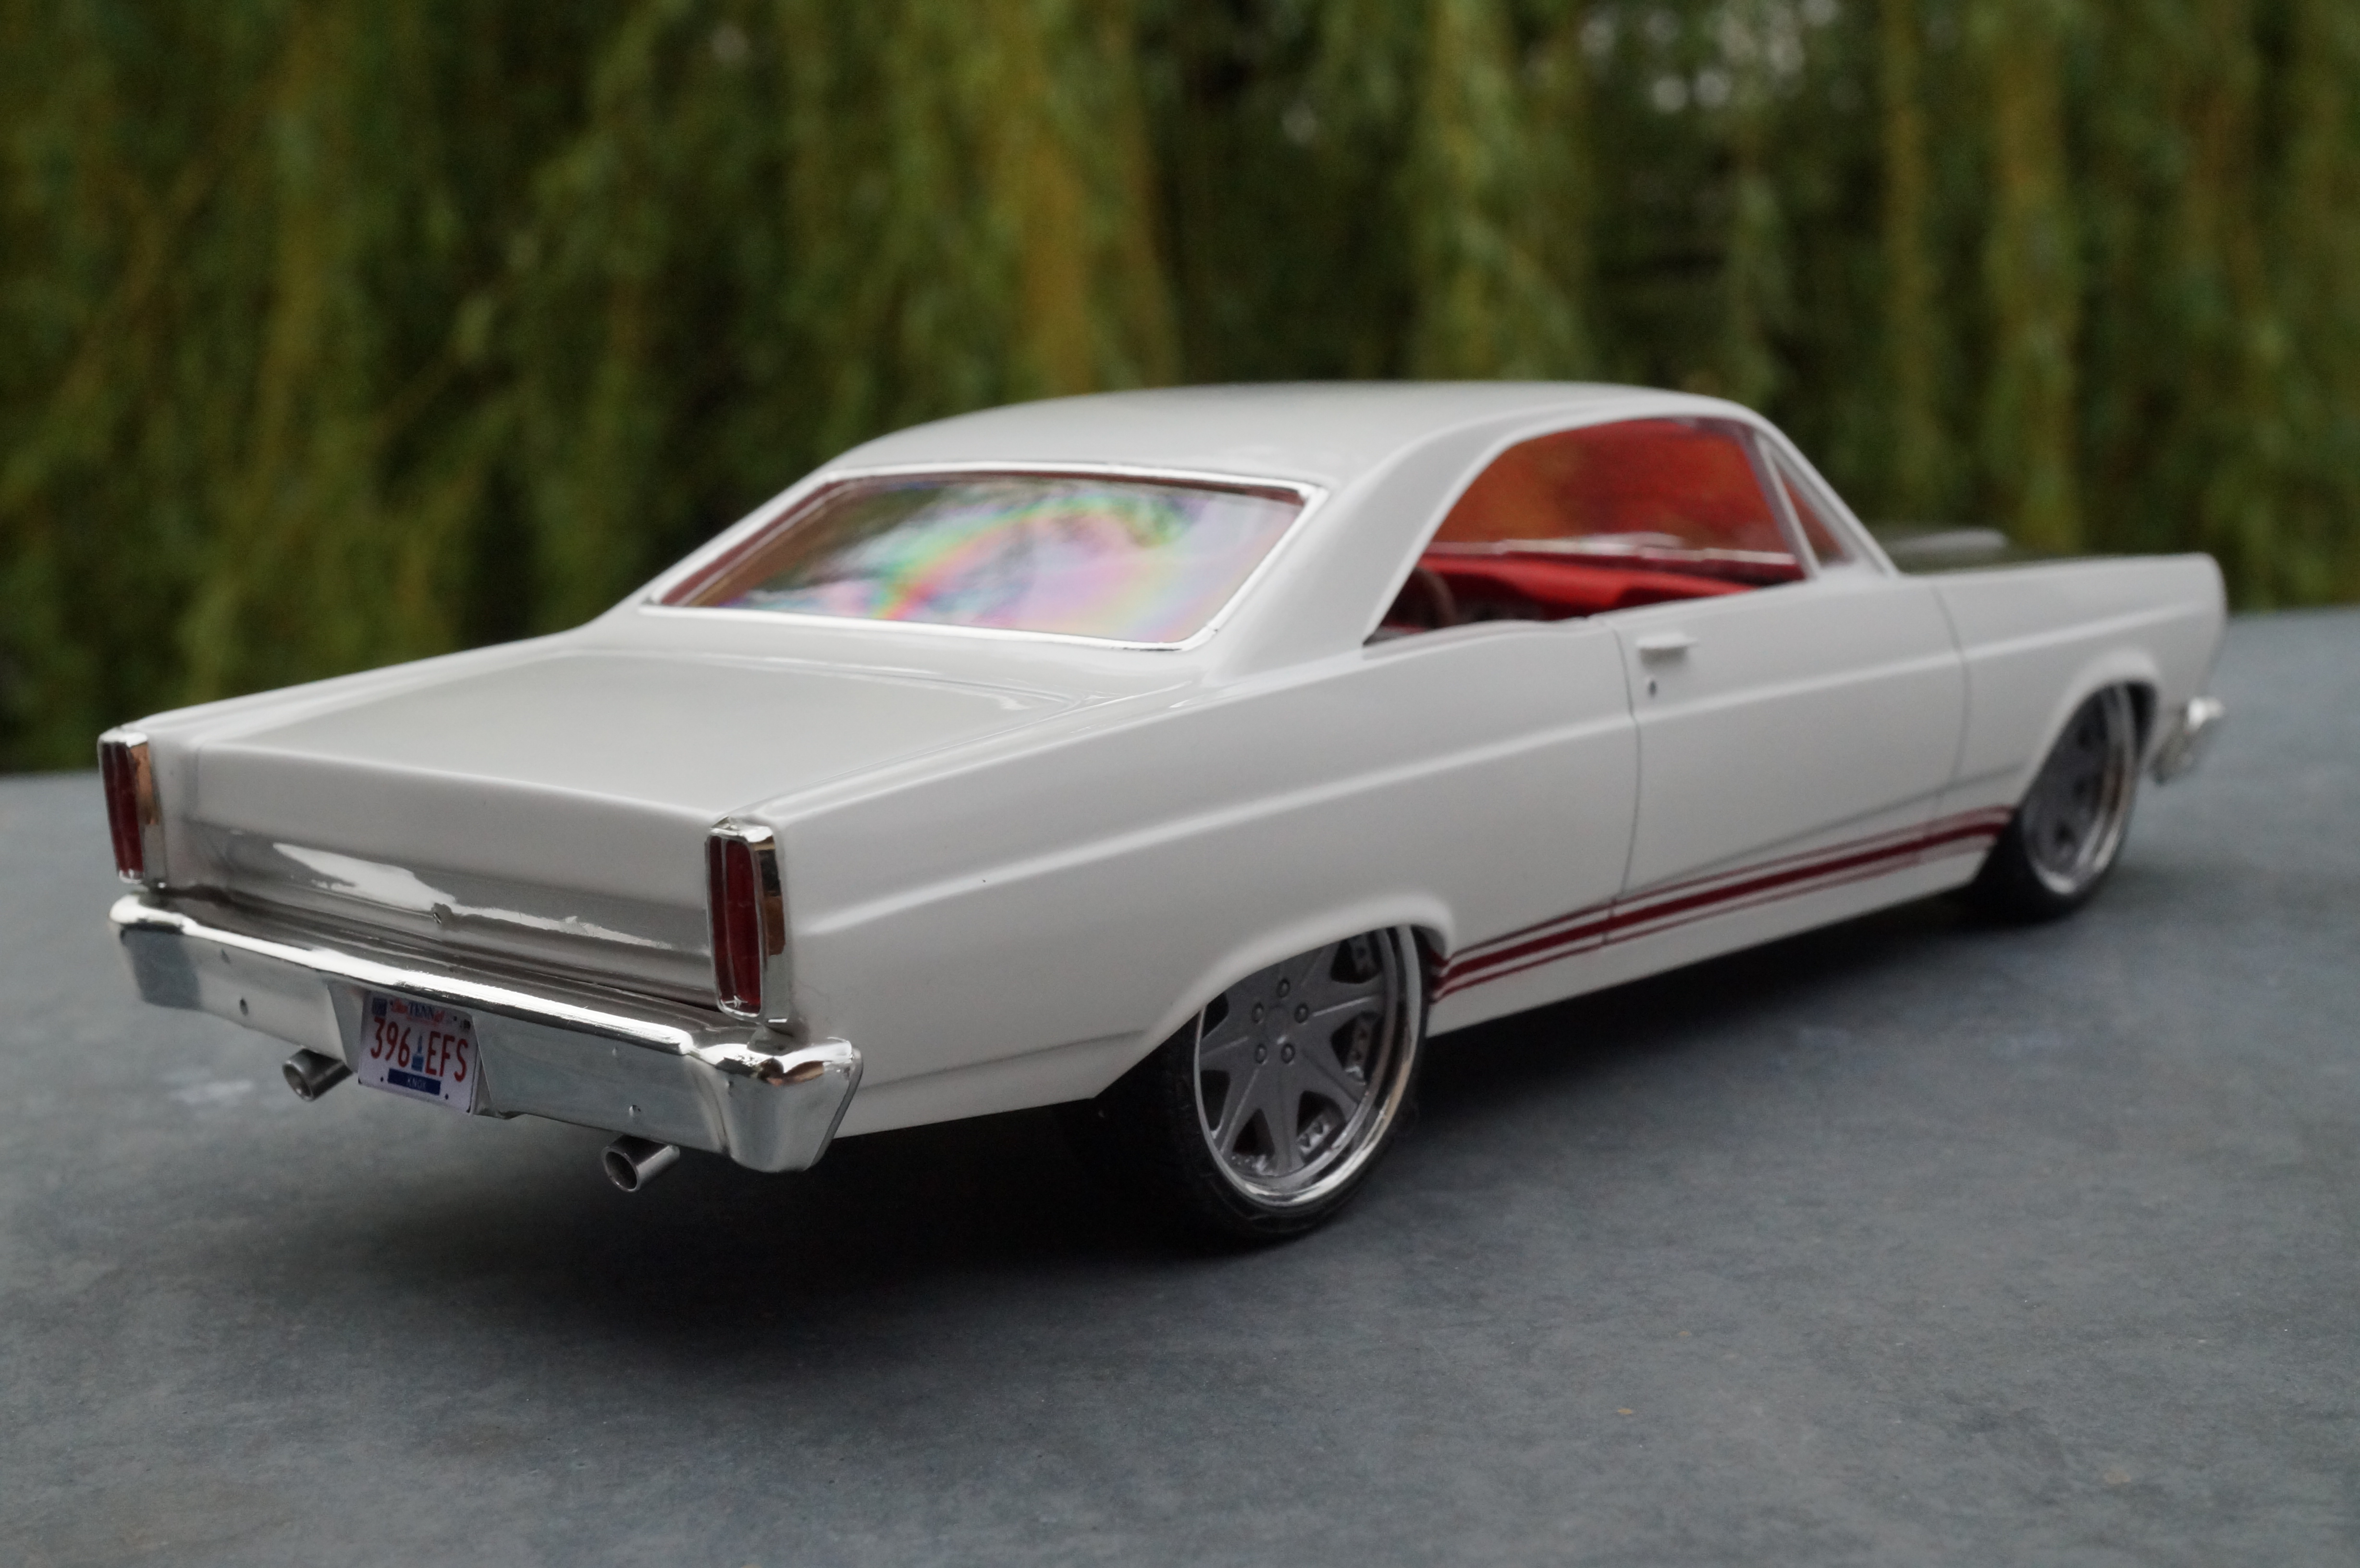 66 Ford Fairlane 427 pro touring , terminée !!! - Page 2 1505020220378898213227397